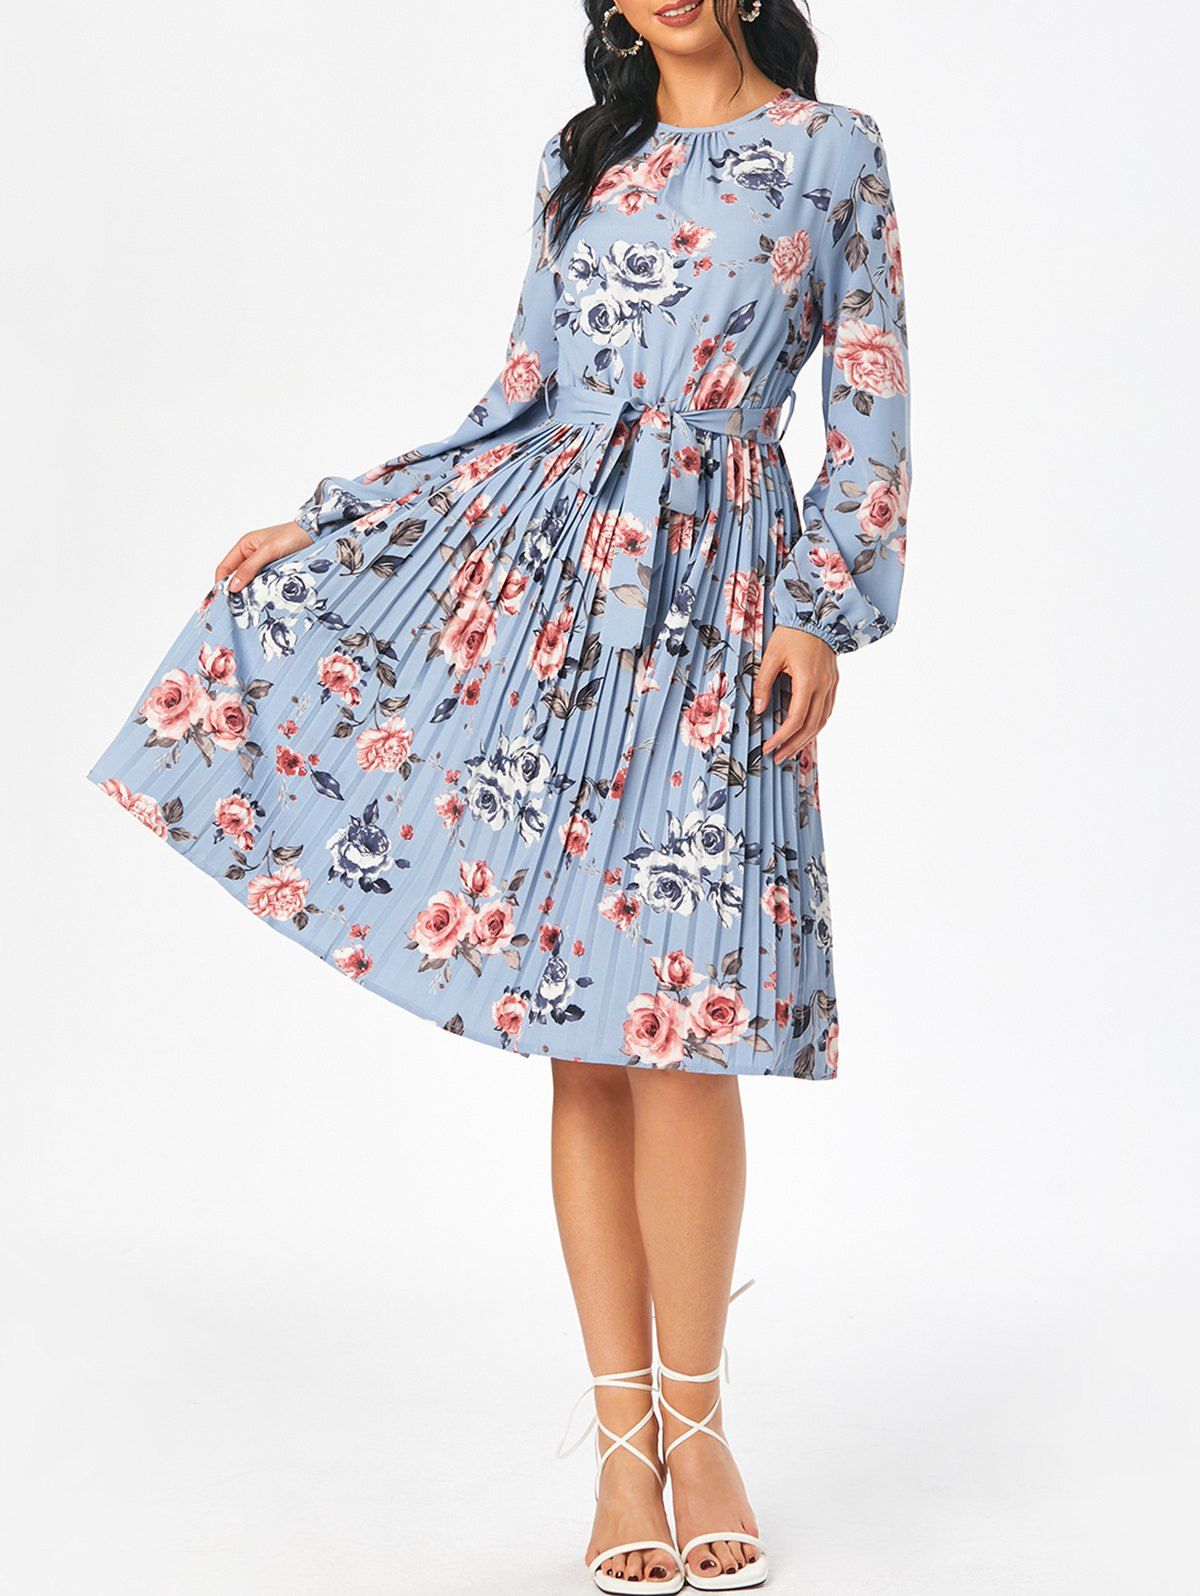 Allover Flower Print Pleated Belted Long Sleeve Dress - multicolor XL